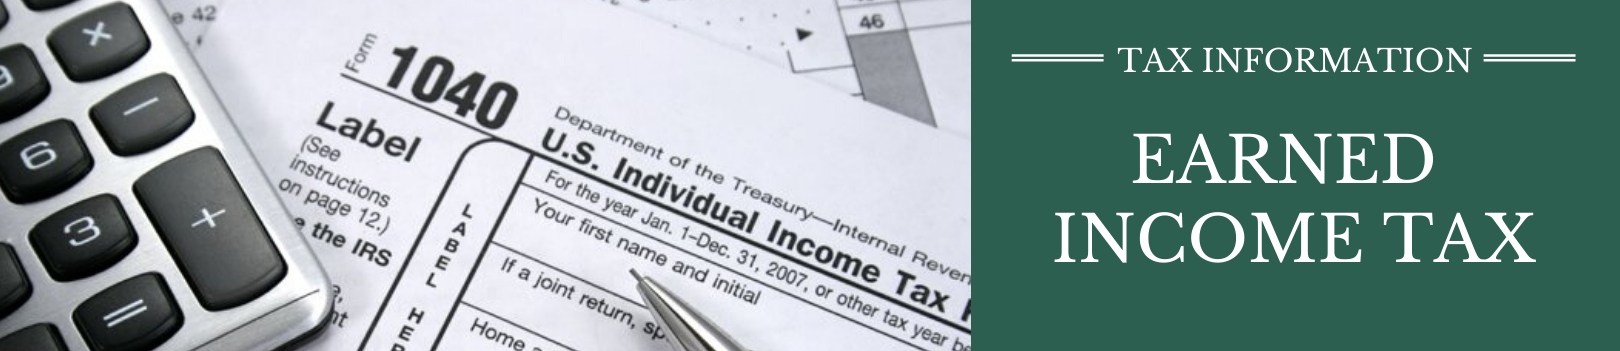 township of freehold tax collector